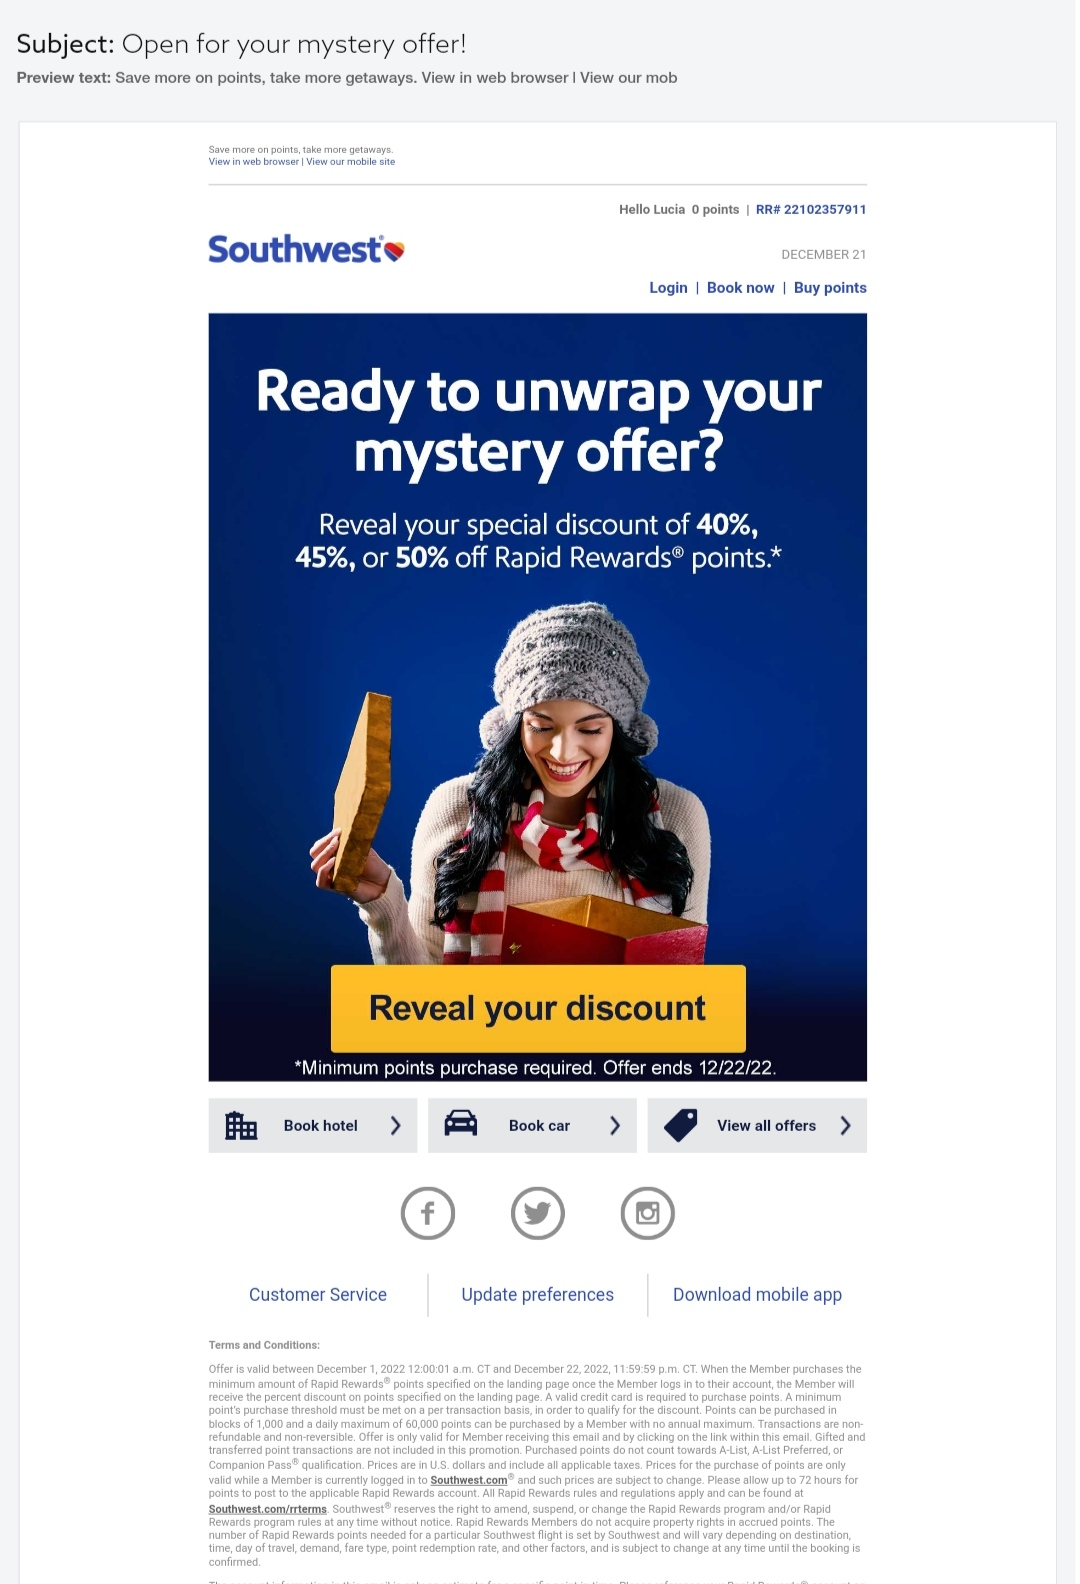 Southwest Airlines Email Marketing 